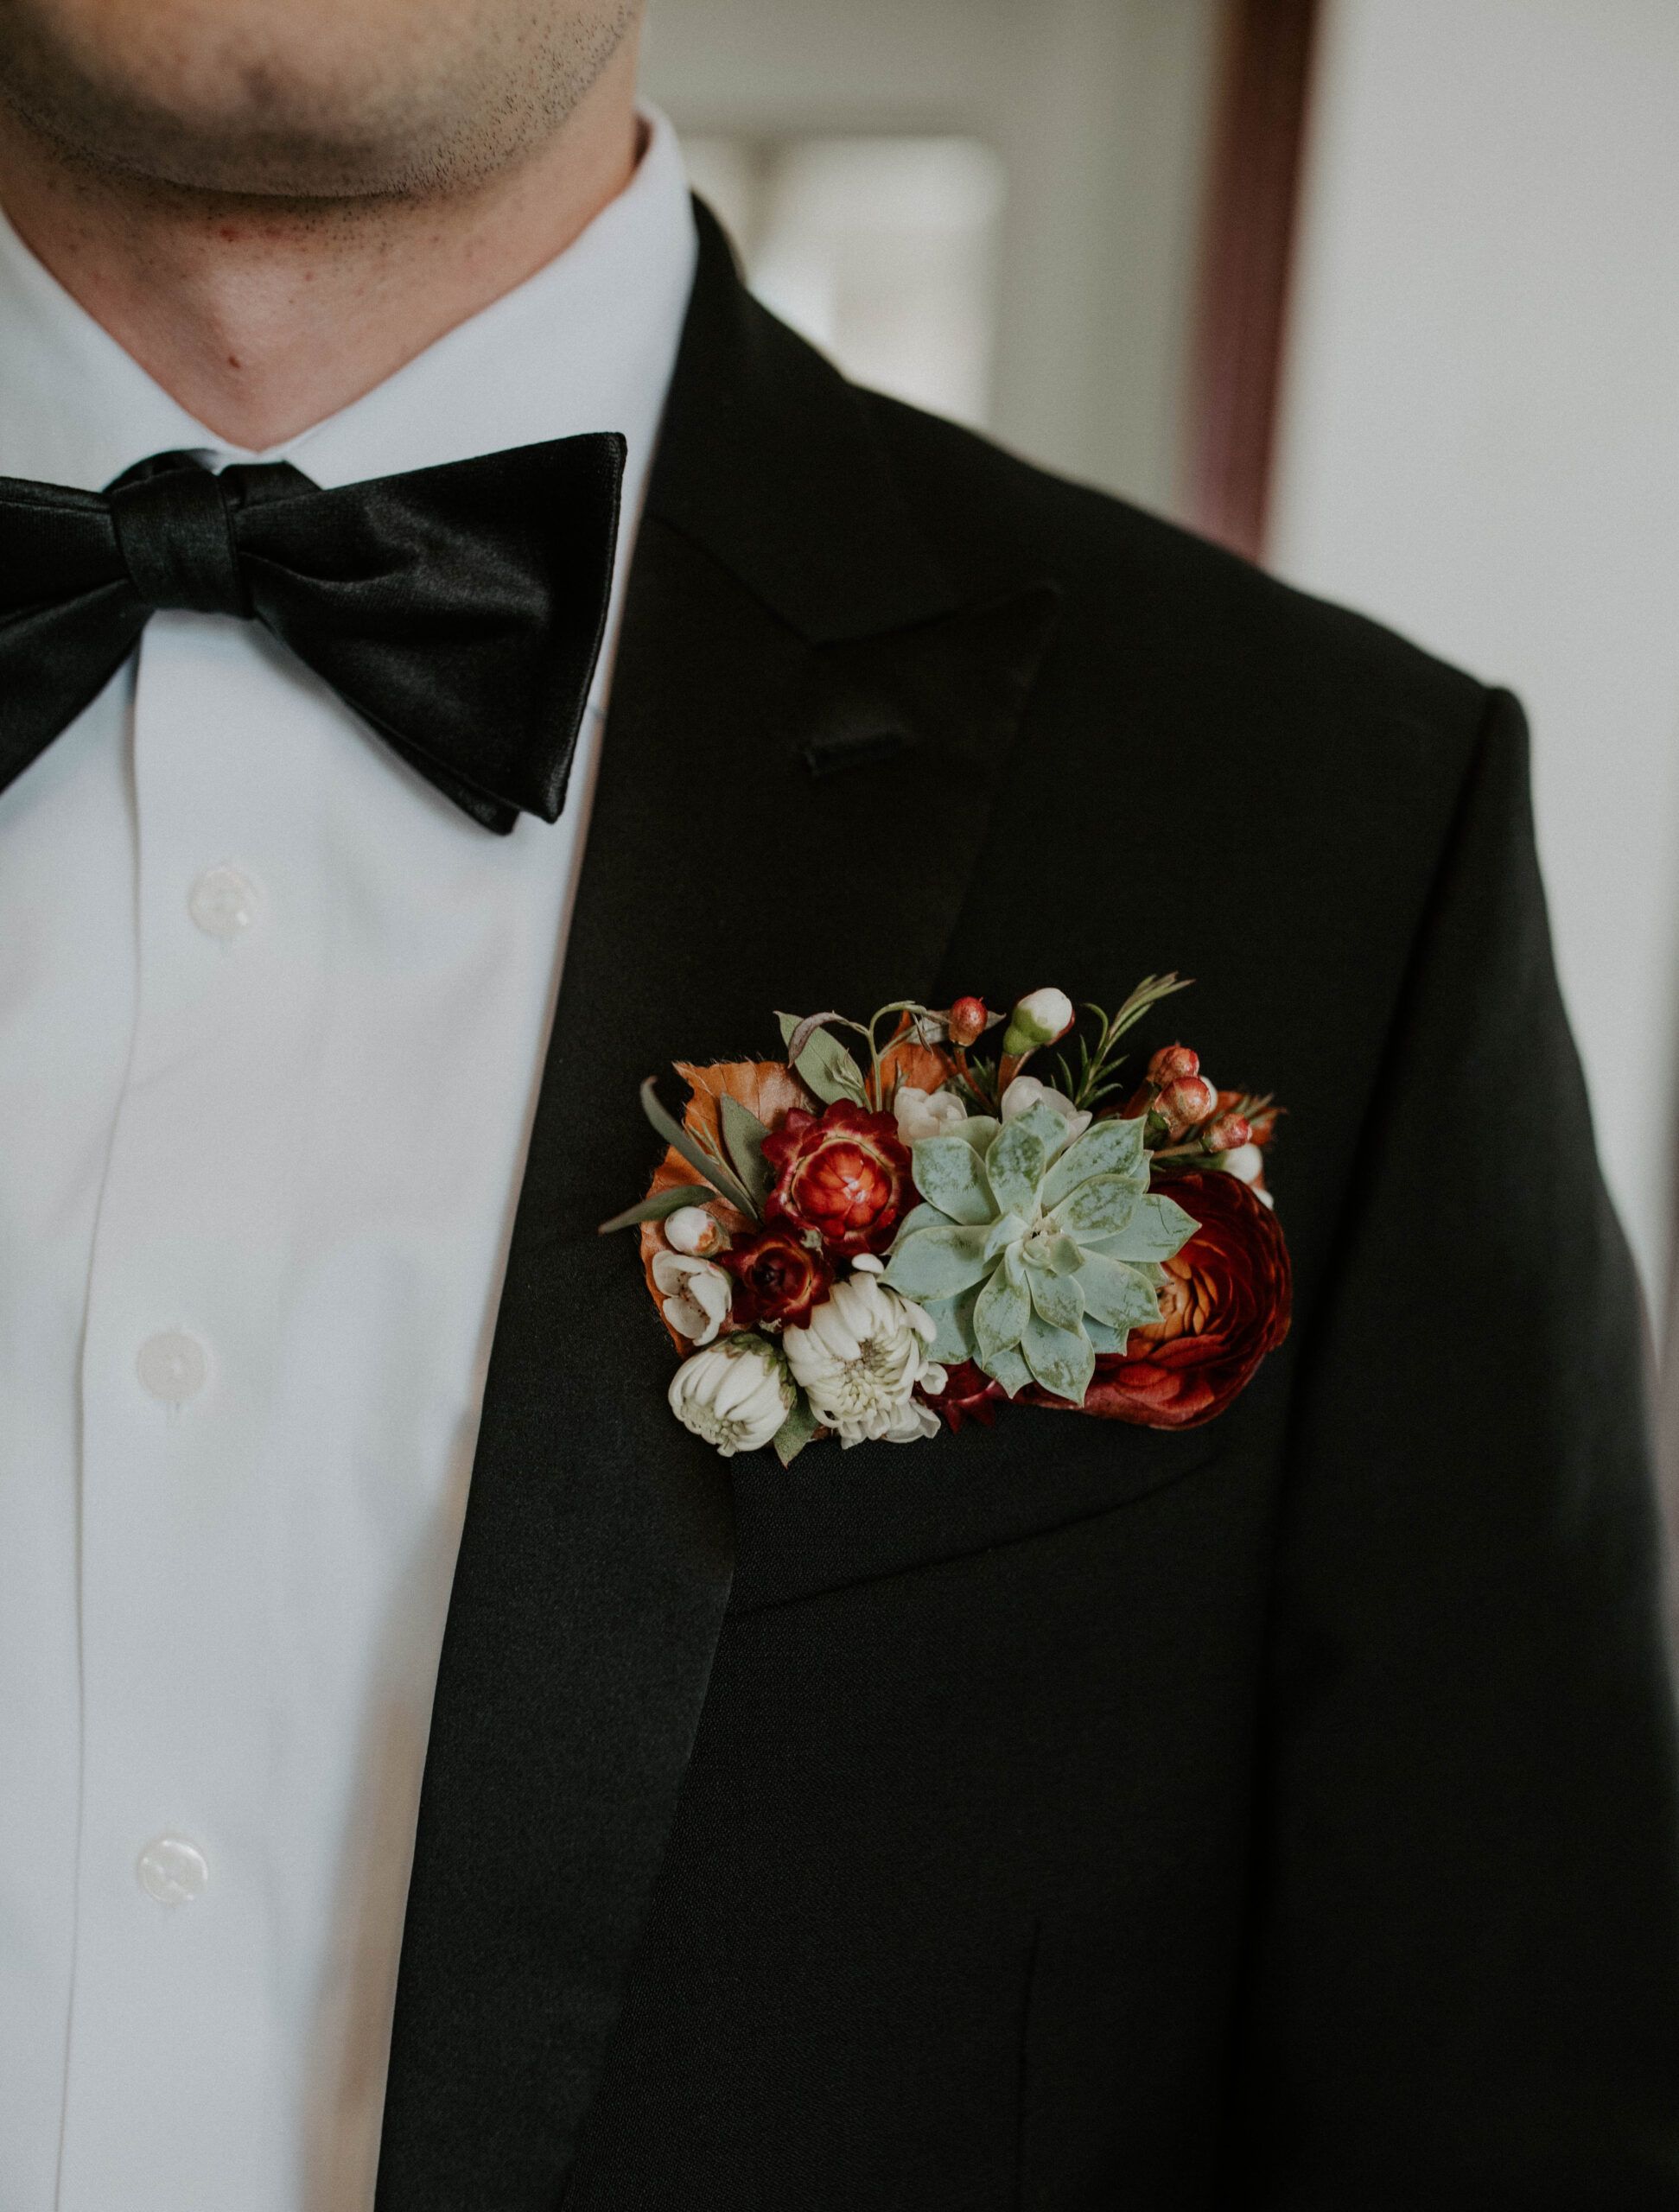 Detail photo of grooms floral pocket with succulents and red florals.